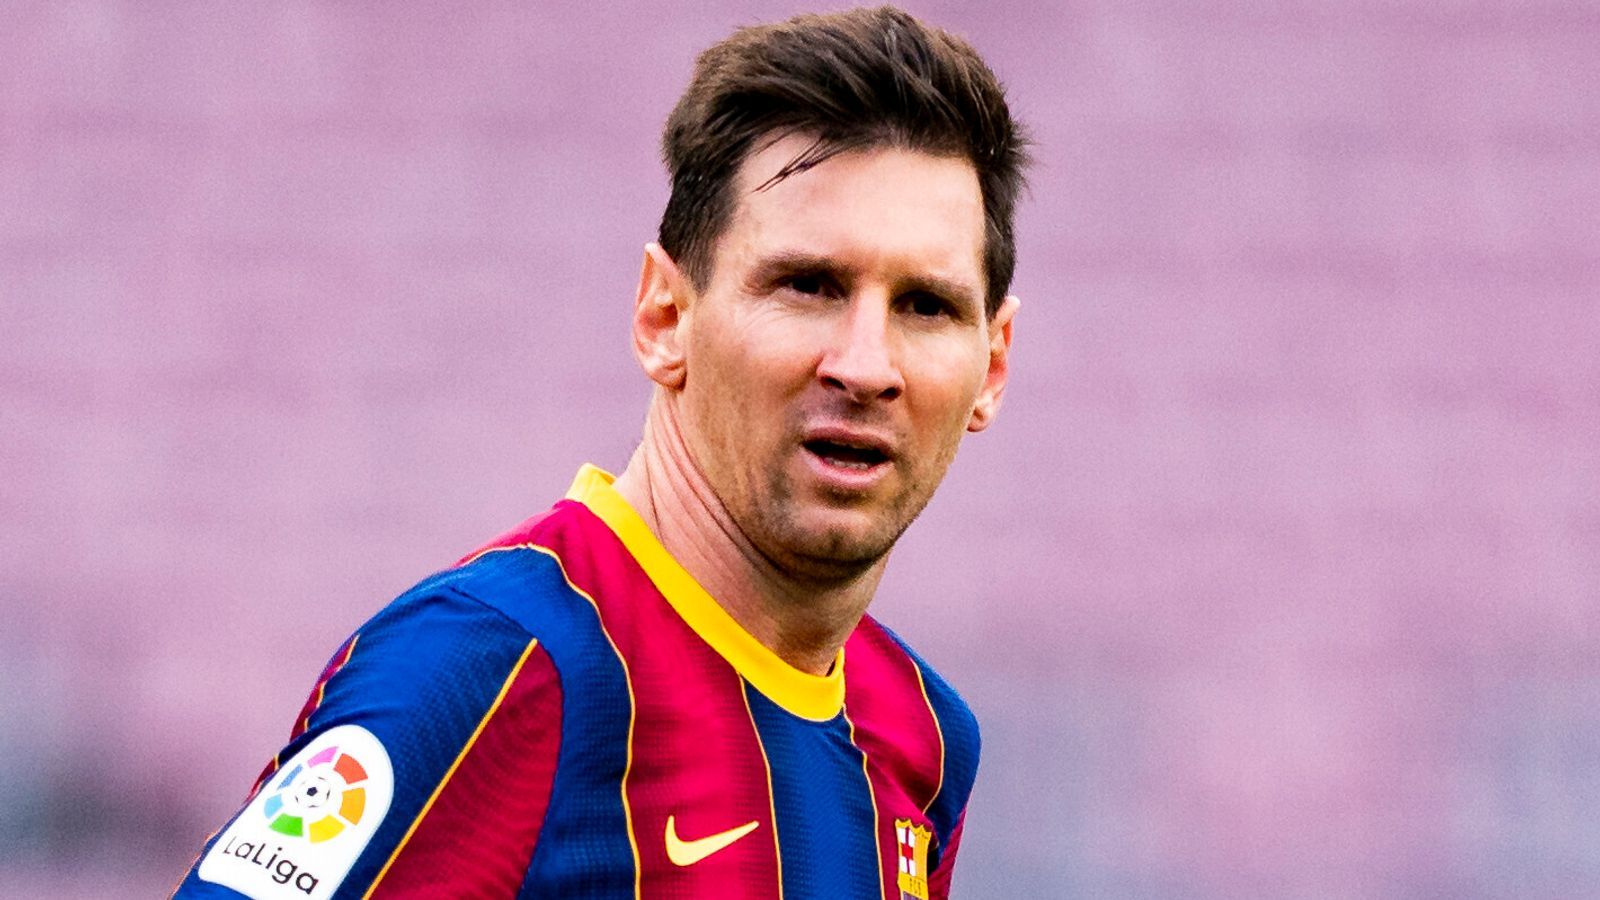 Barcelona will install statue in honor of living legend Lionel Messi